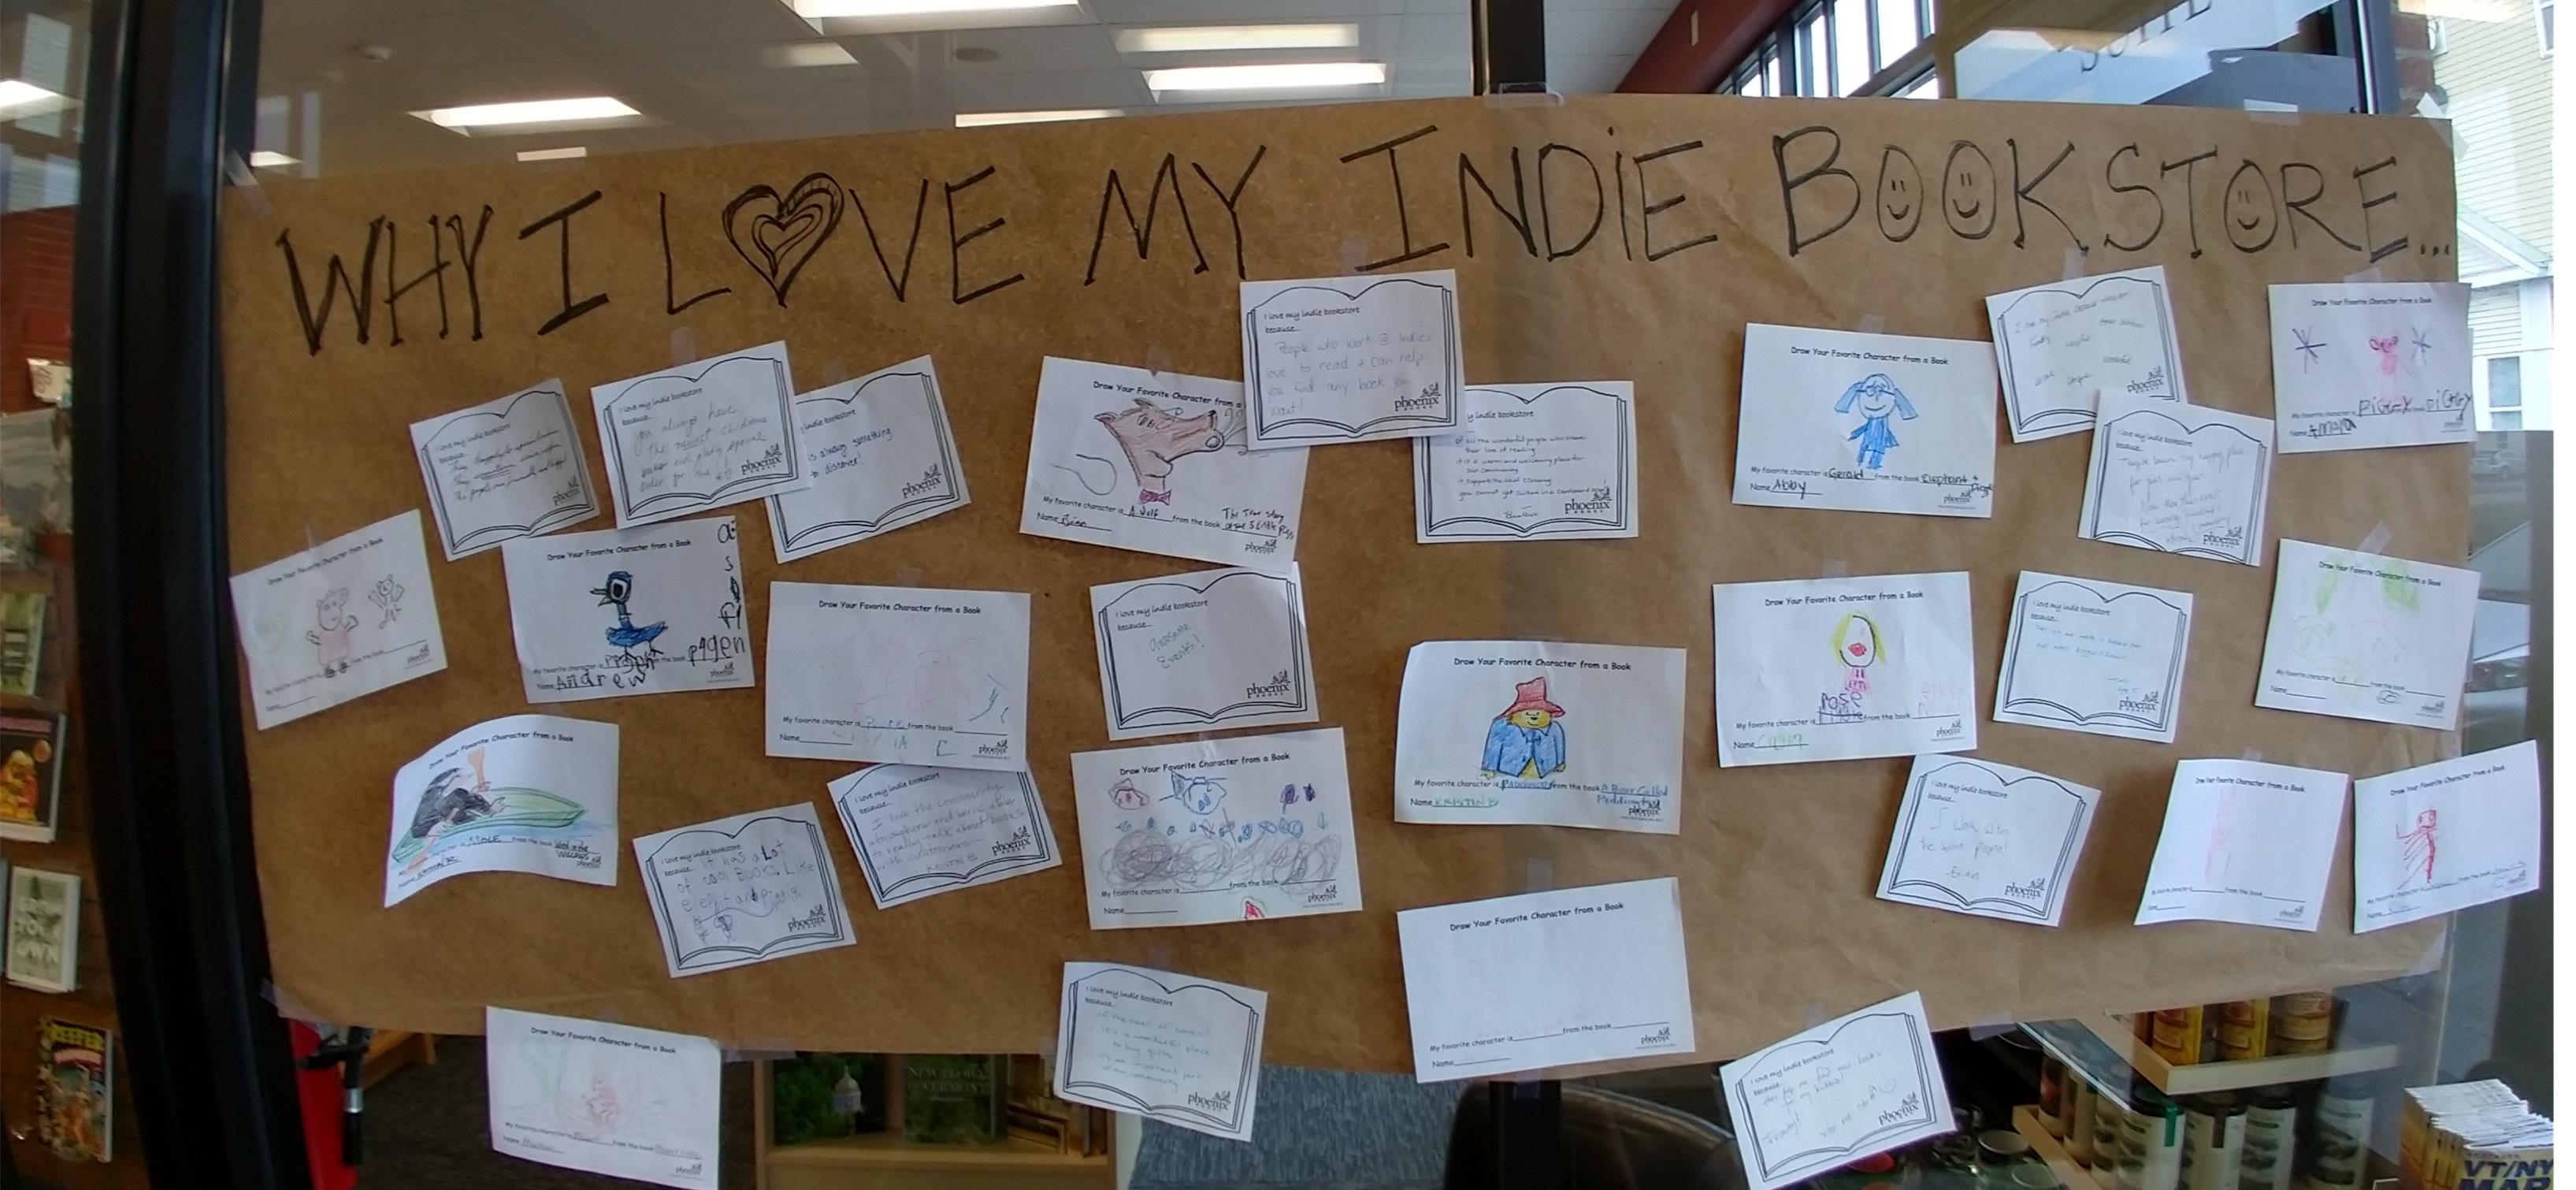 At Phoenix Burlington, customers added their thoughts to the "Why I love my indie" display.